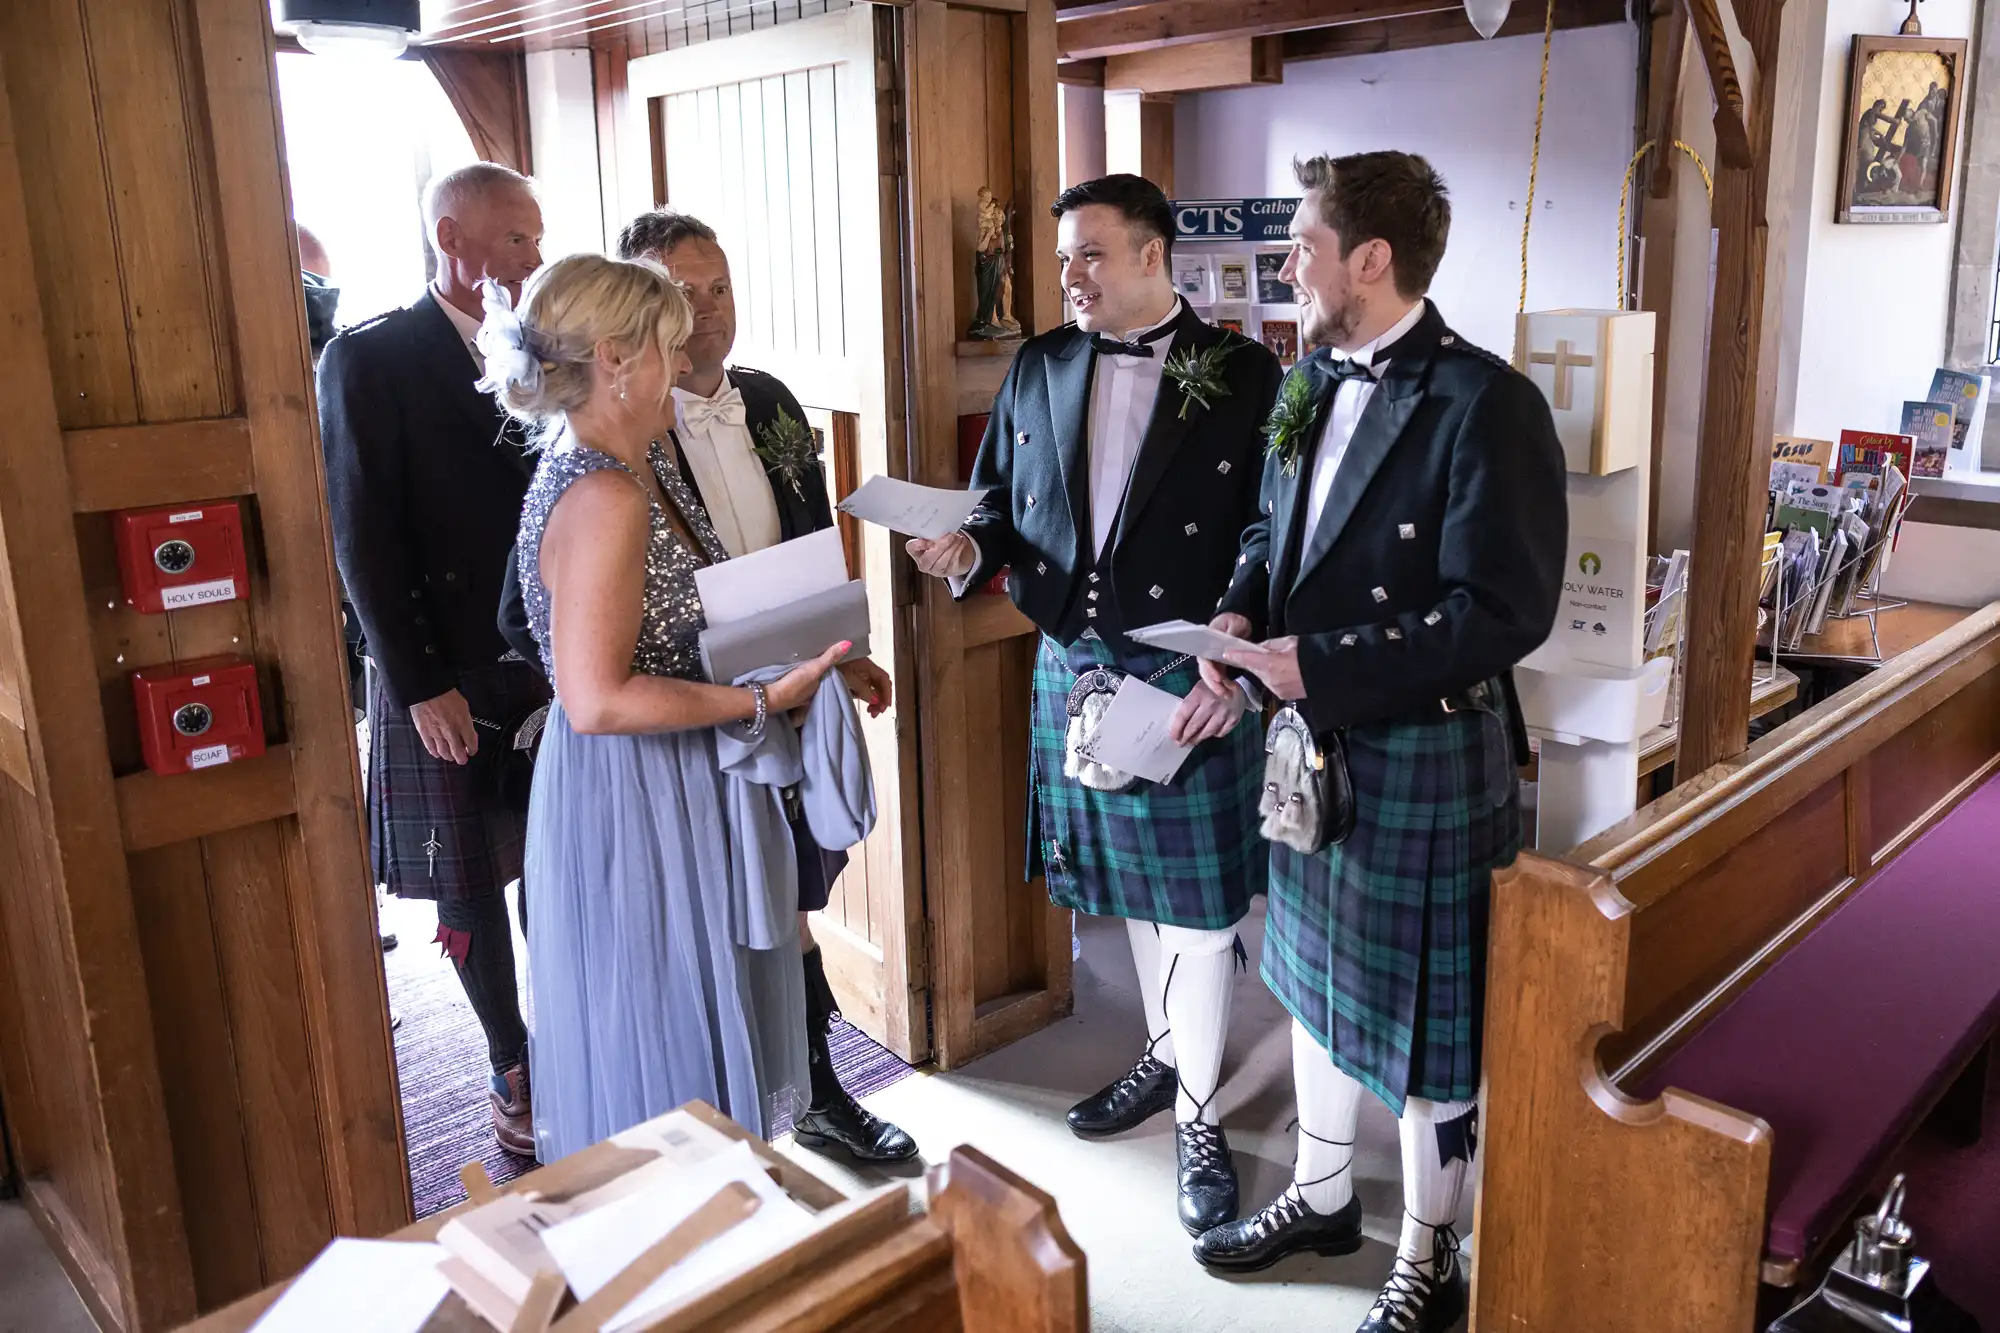 Two couples exchanging vows in a church, with one couple wearing traditional kilts. Guests stand nearby inside a wooden interior.